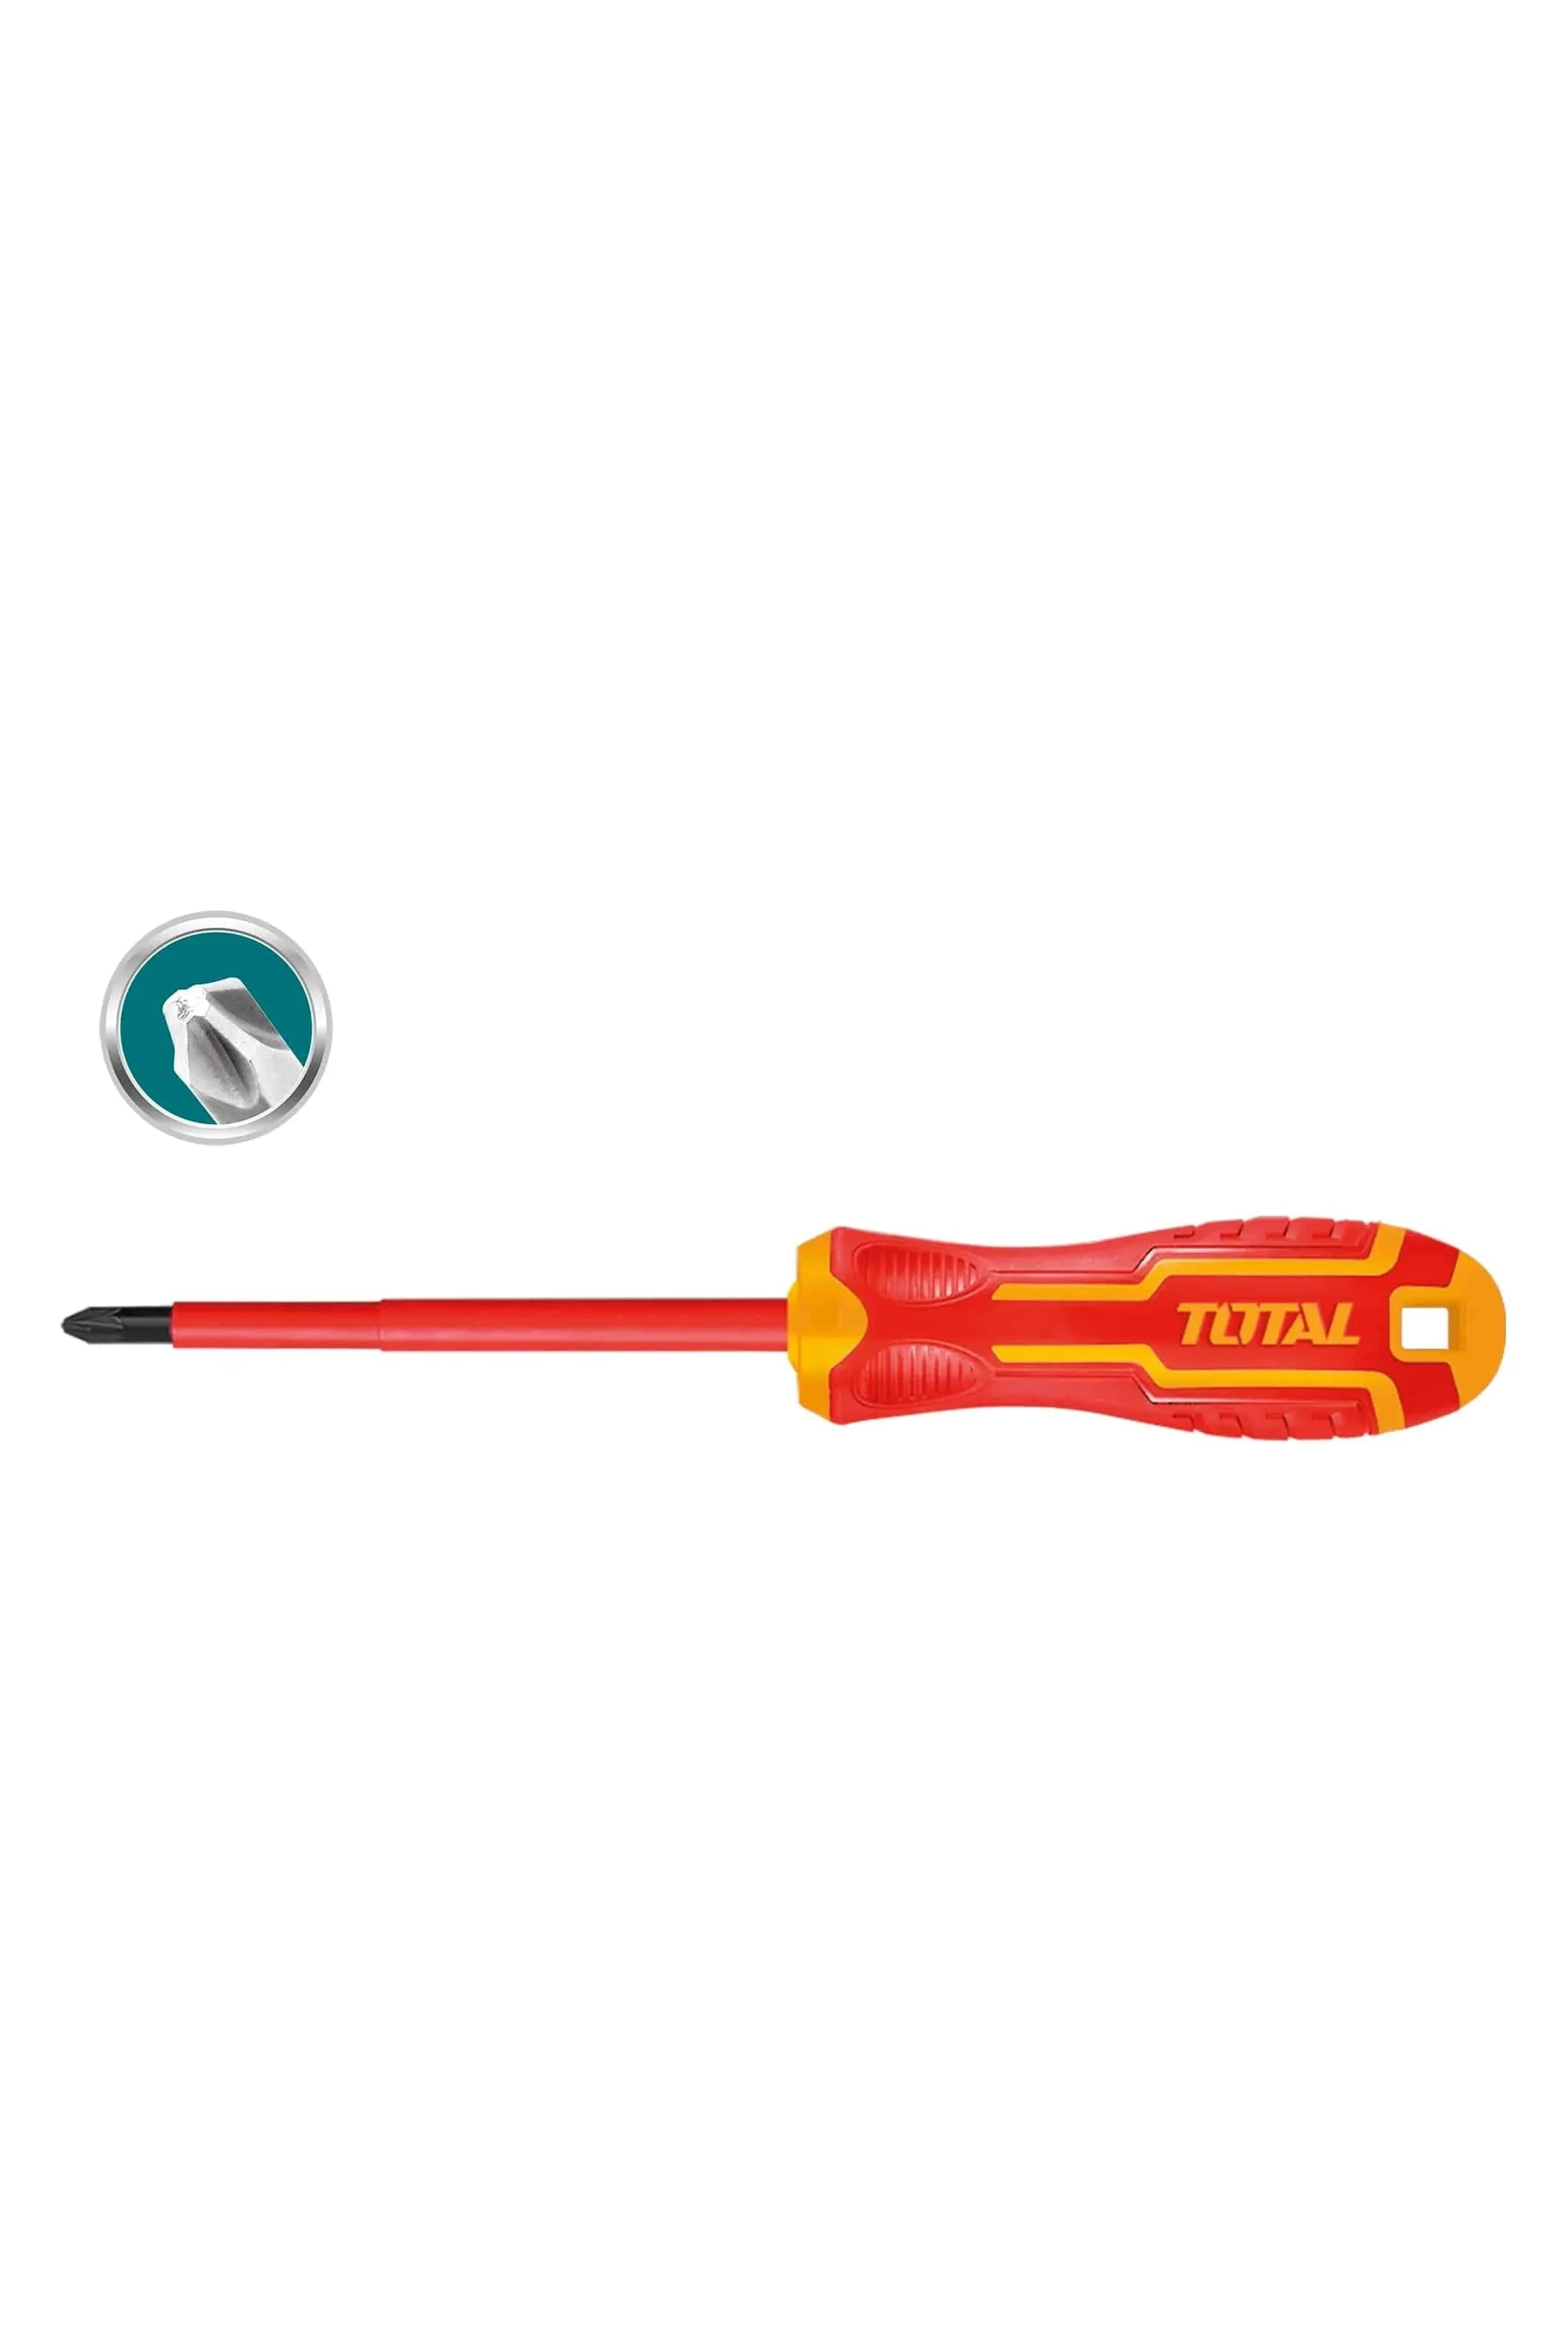 TOTAL INSULATED SCREWDRIVER PH0×60 - Elite Renewable Solutions